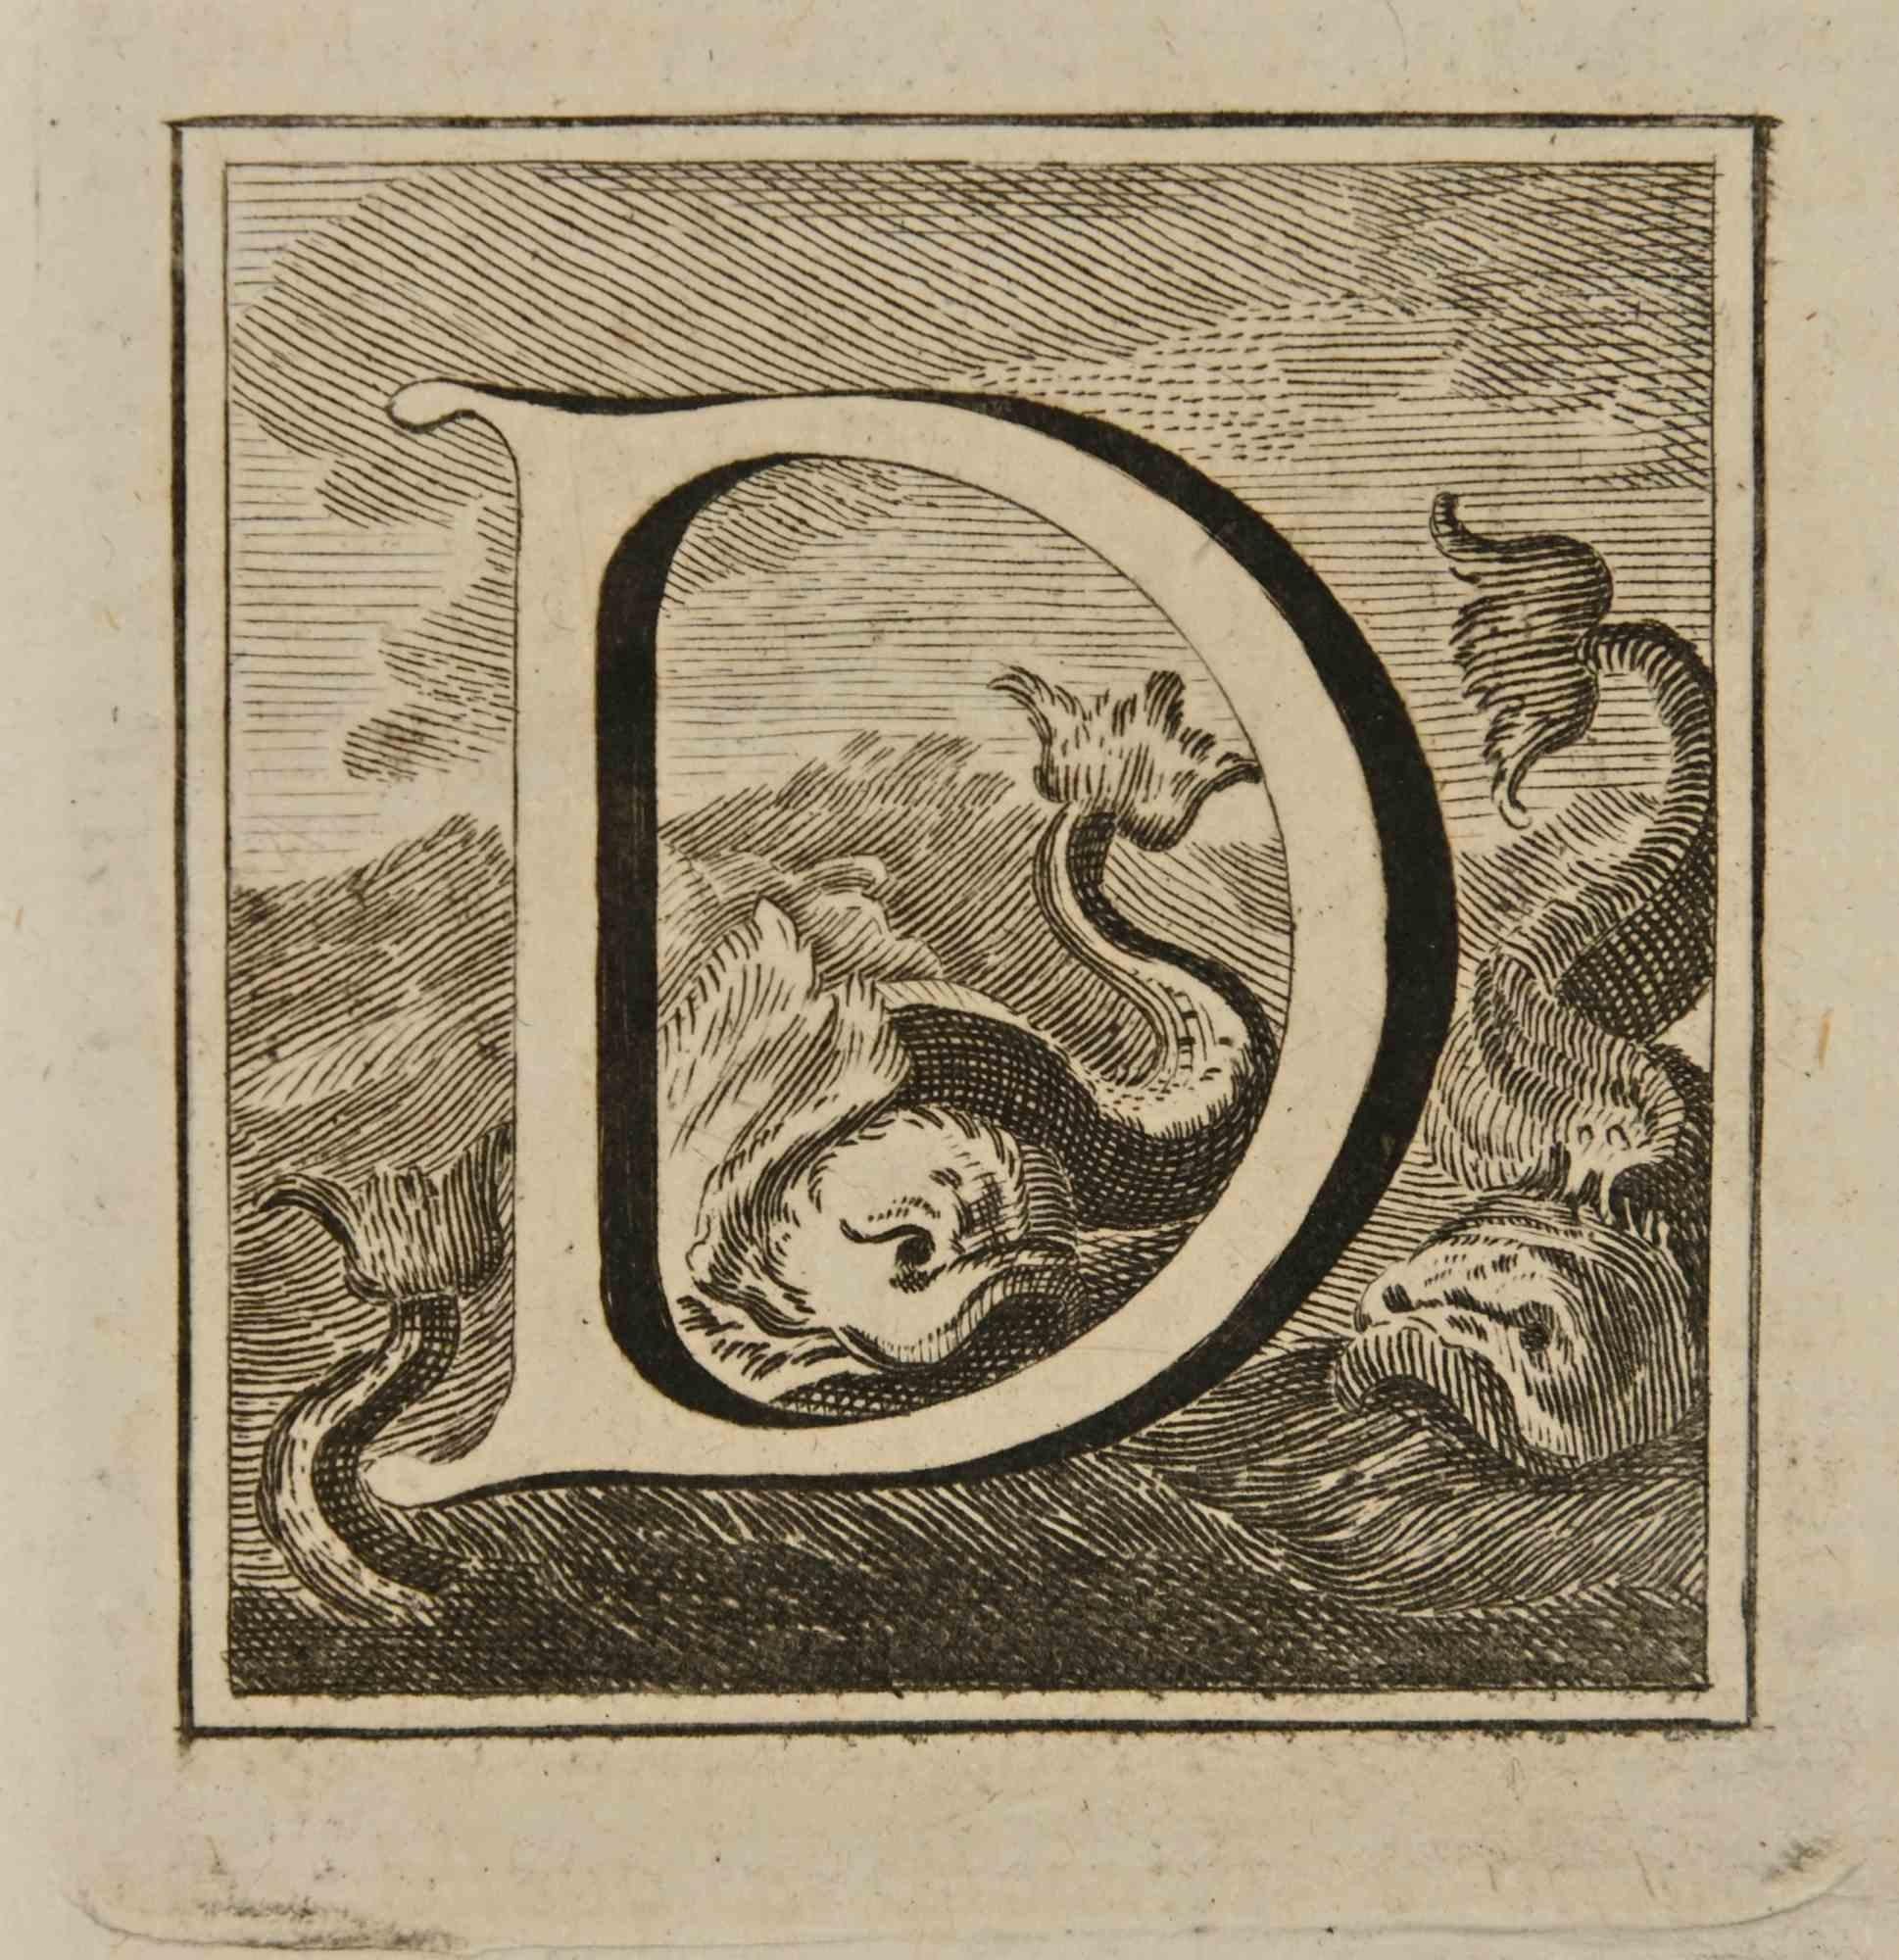 Letter of the Alphabet D,  from the series "Antiquities of Herculaneum", is an etching on paper realized by Luigi Vanvitelli in the 18th century.

Good conditions.

The etching belongs to the print suite “Antiquities of Herculaneum Exposed”